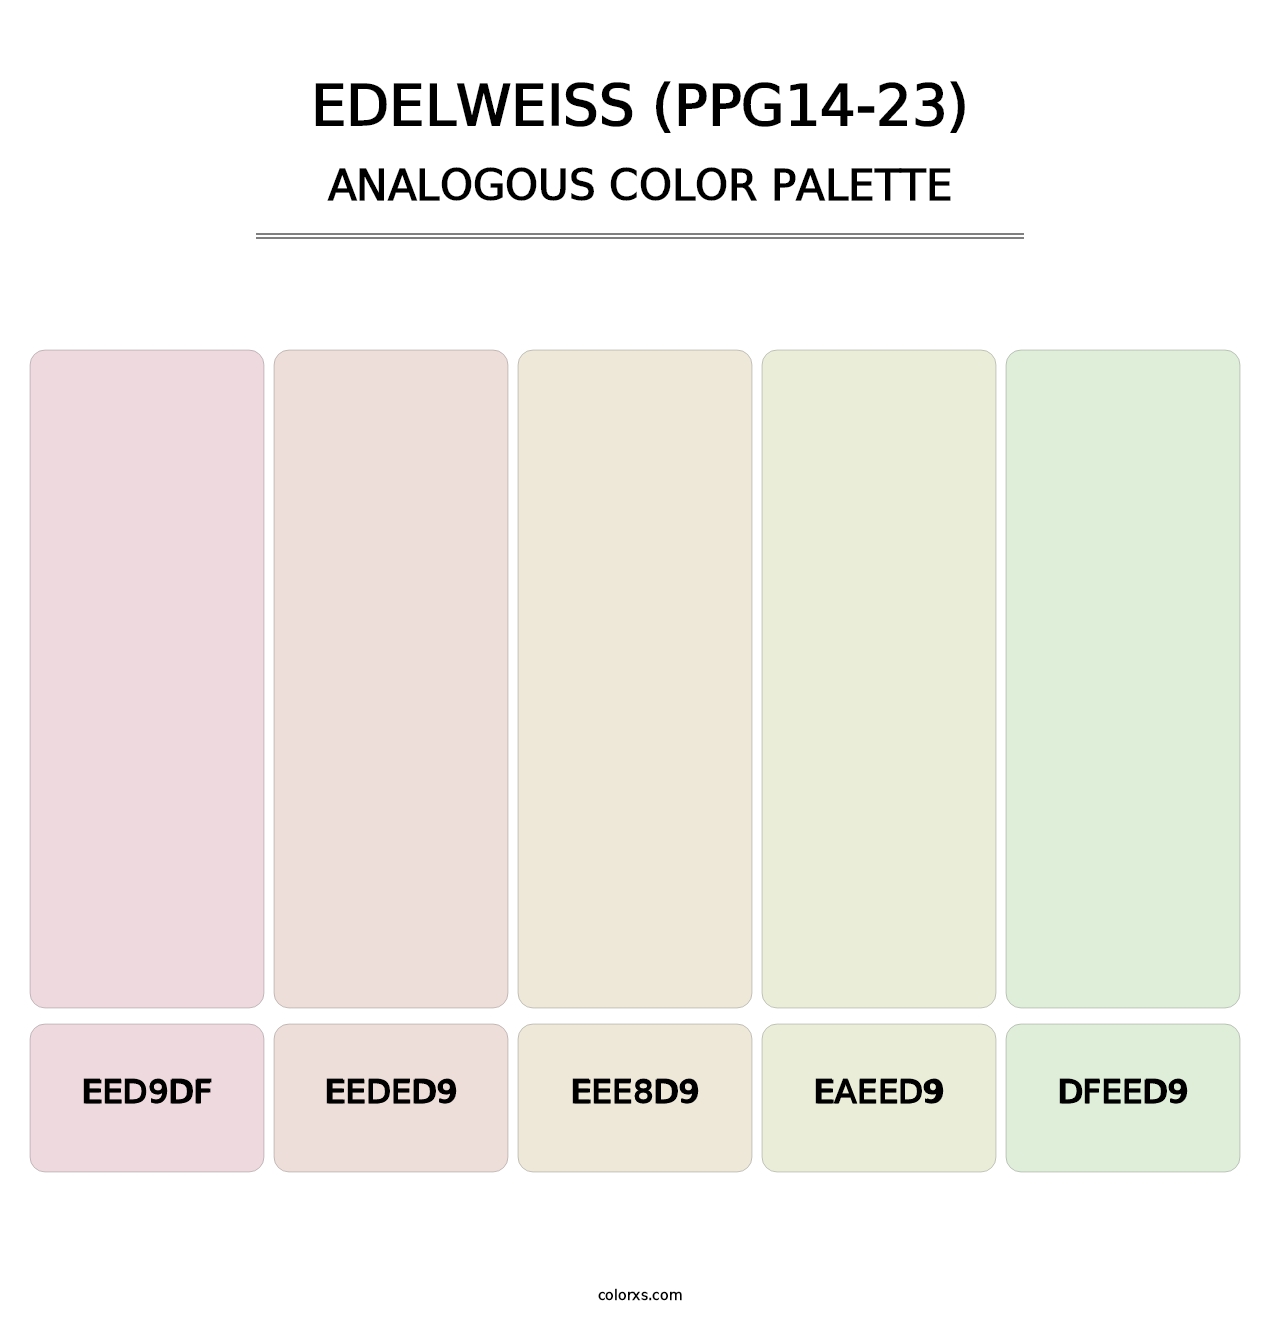 Edelweiss (PPG14-23) - Analogous Color Palette